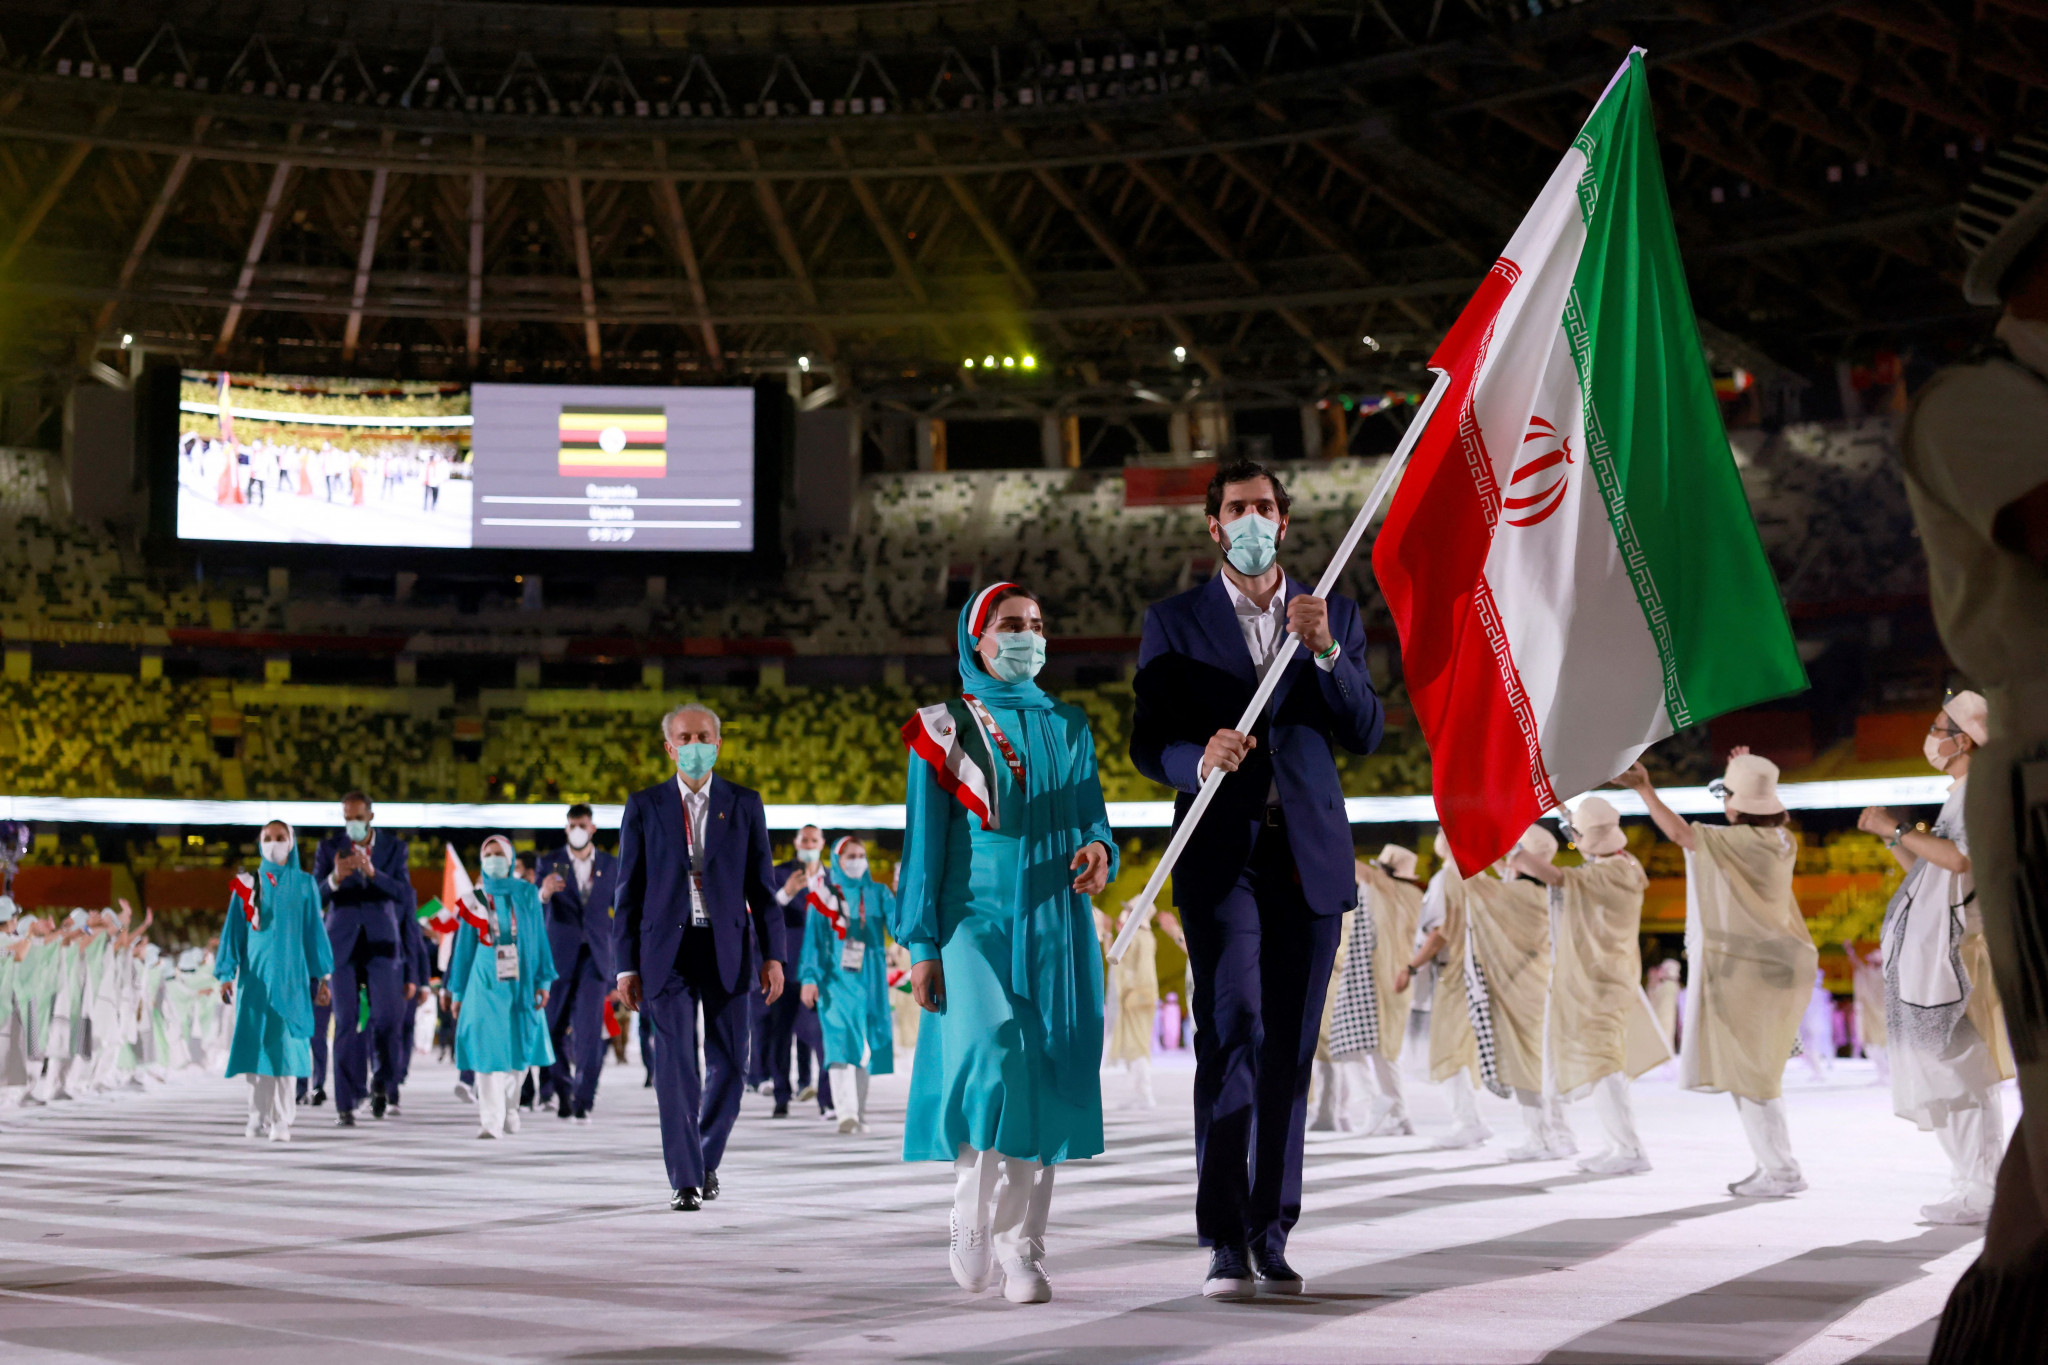 The National Olympic Committee of the Islamic Republic of Iran have been urged to ensure a "full observance" of the Olympic Charter after being summed to Lausanne to meet IOC President Thomas Bach ©Getty Images